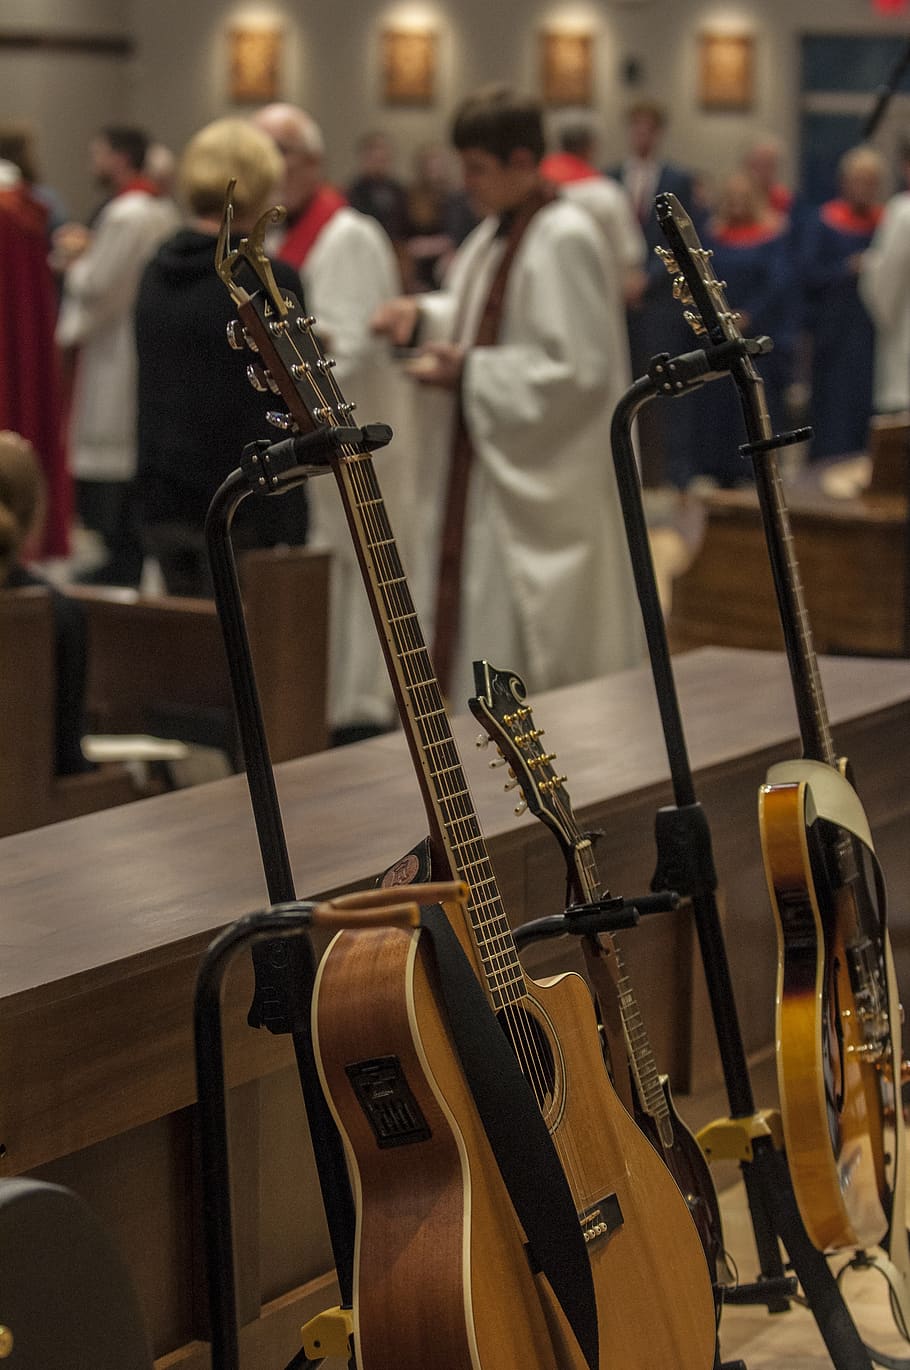 music, instrument, musician, performance, musical instrument, string instrument, arts culture and entertainment, guitar, musical equipment, focus on foreground